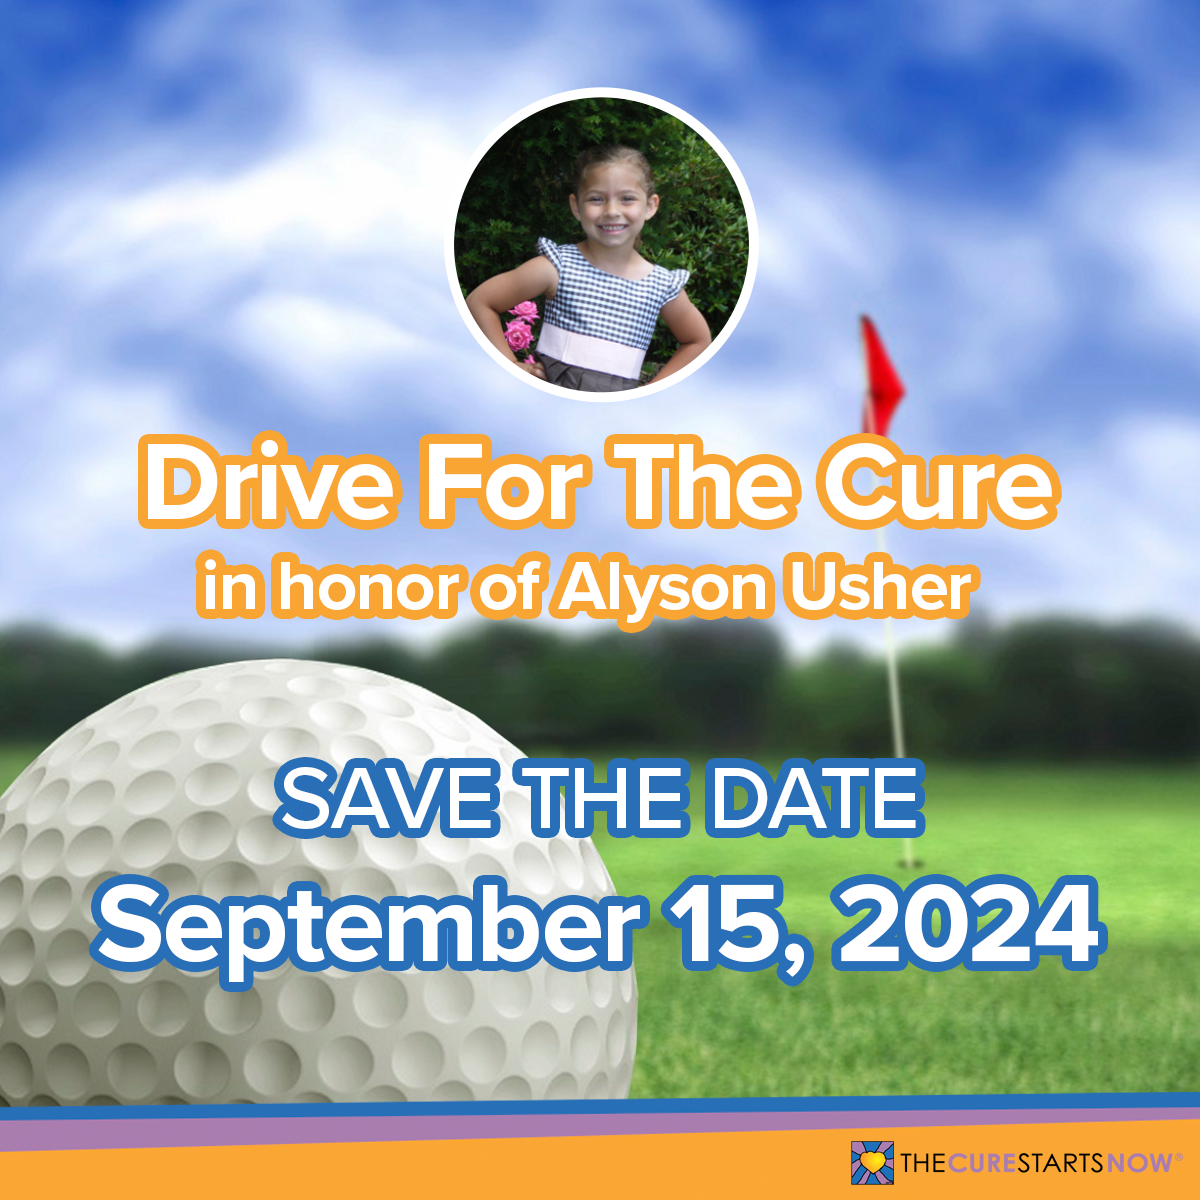 Drive for the Cure